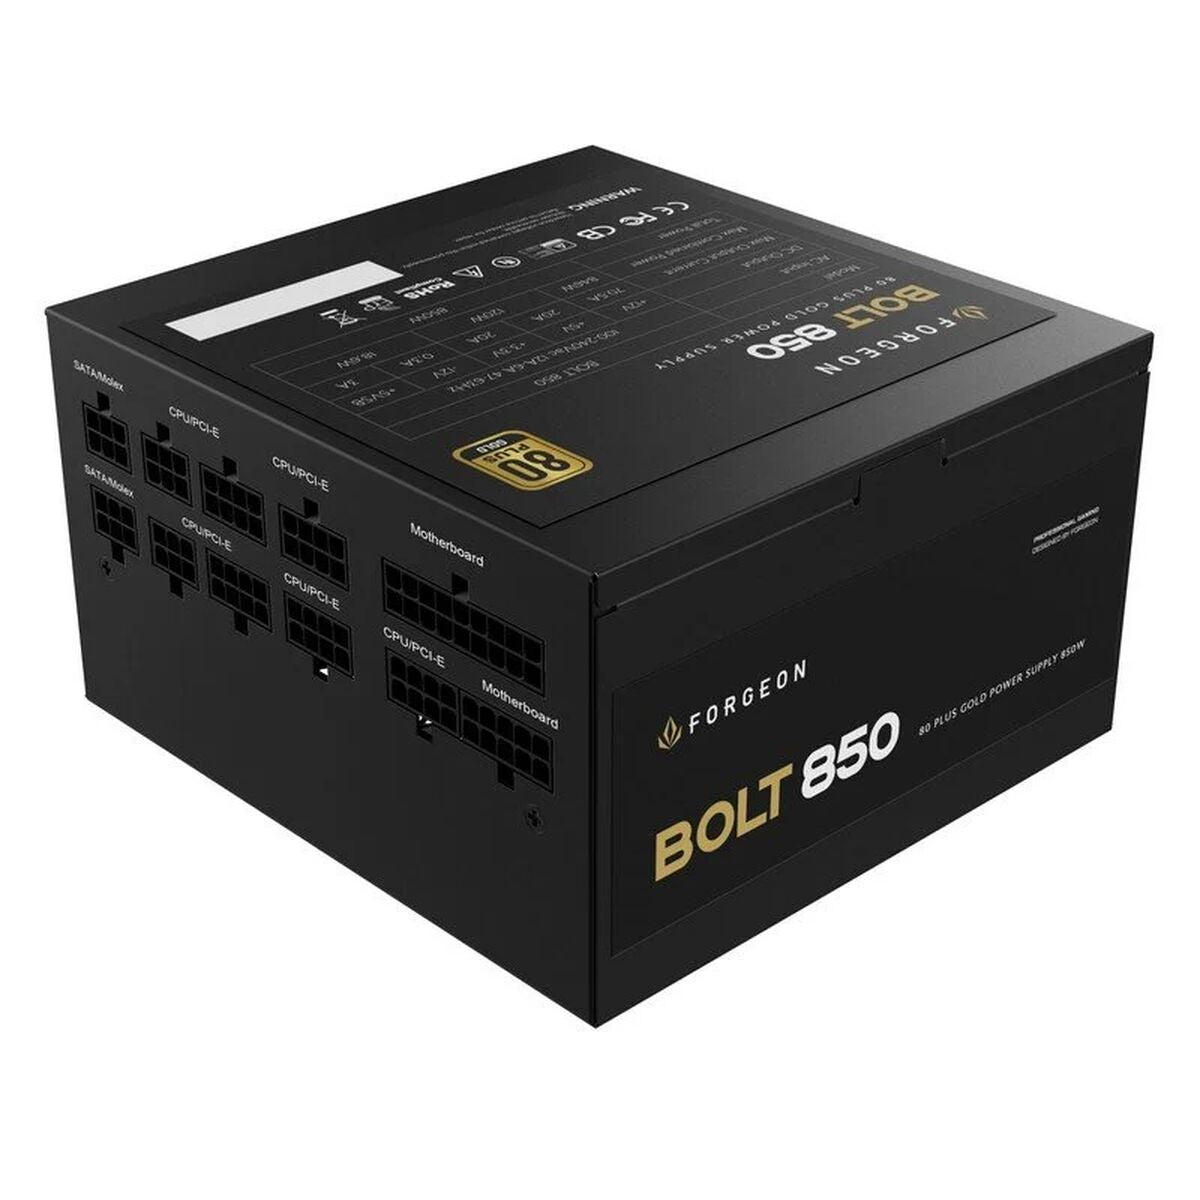 Gaming Power Supply Forgeon Bolt PSU 850W, Forgeon, Computing, Components, gaming-power-supply-forgeon-bolt-psu-850w, :850W, Brand_Forgeon, category-reference-2609, category-reference-2803, category-reference-2816, category-reference-t-19685, category-reference-t-19912, category-reference-t-21360, computers / components, Condition_NEW, ferretería, Price_600 - 700, Teleworking, RiotNook